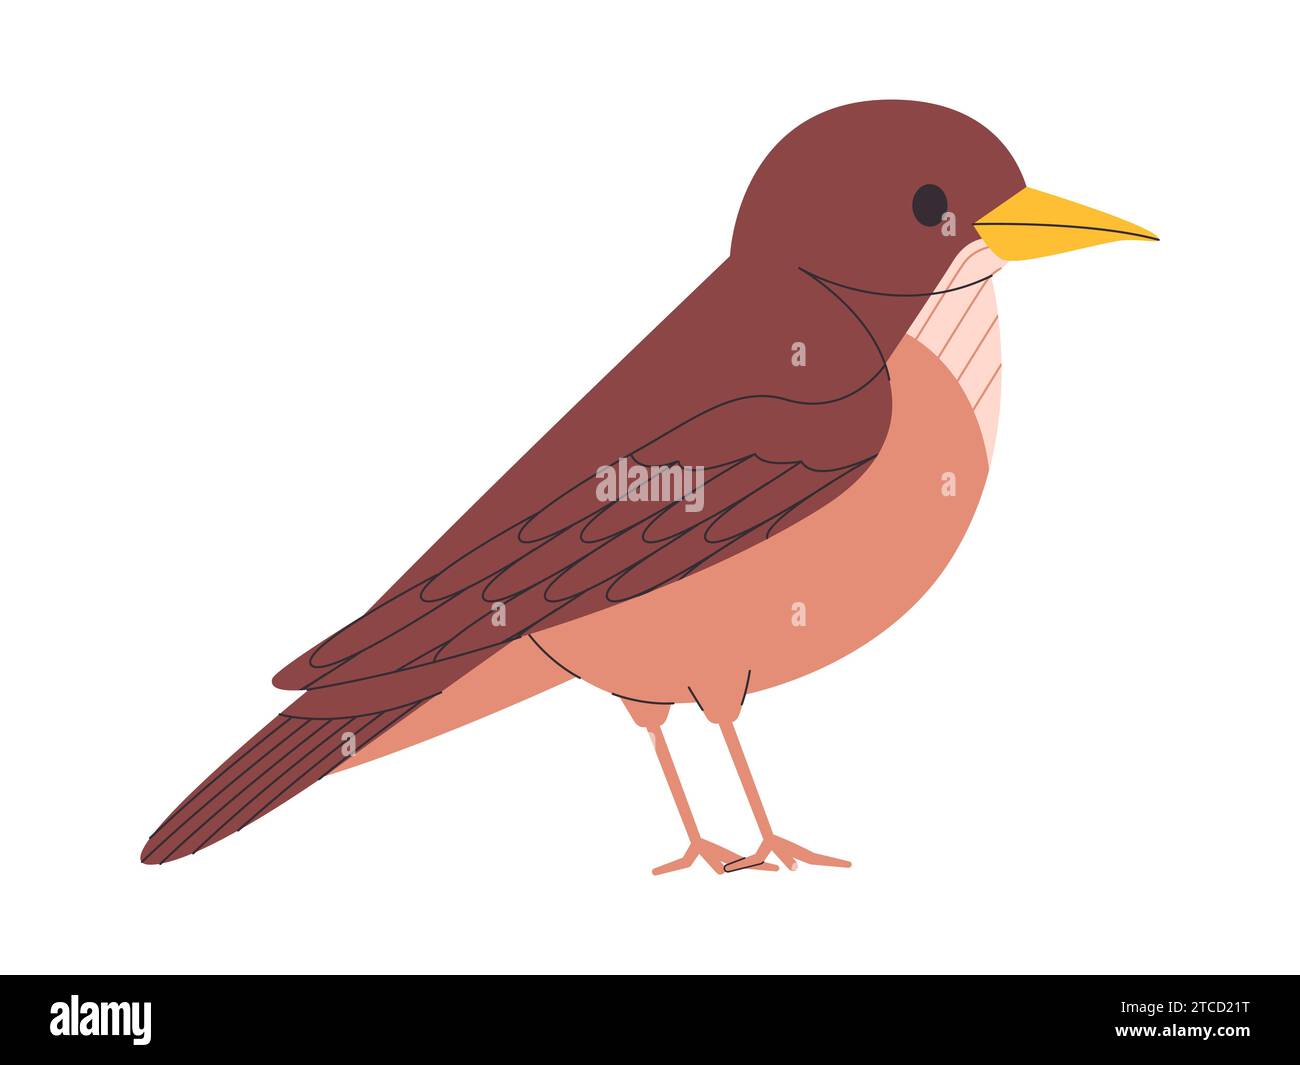 brown color small bird clay colored thrush species pretty cute nature animal wildlife creature Stock Vector